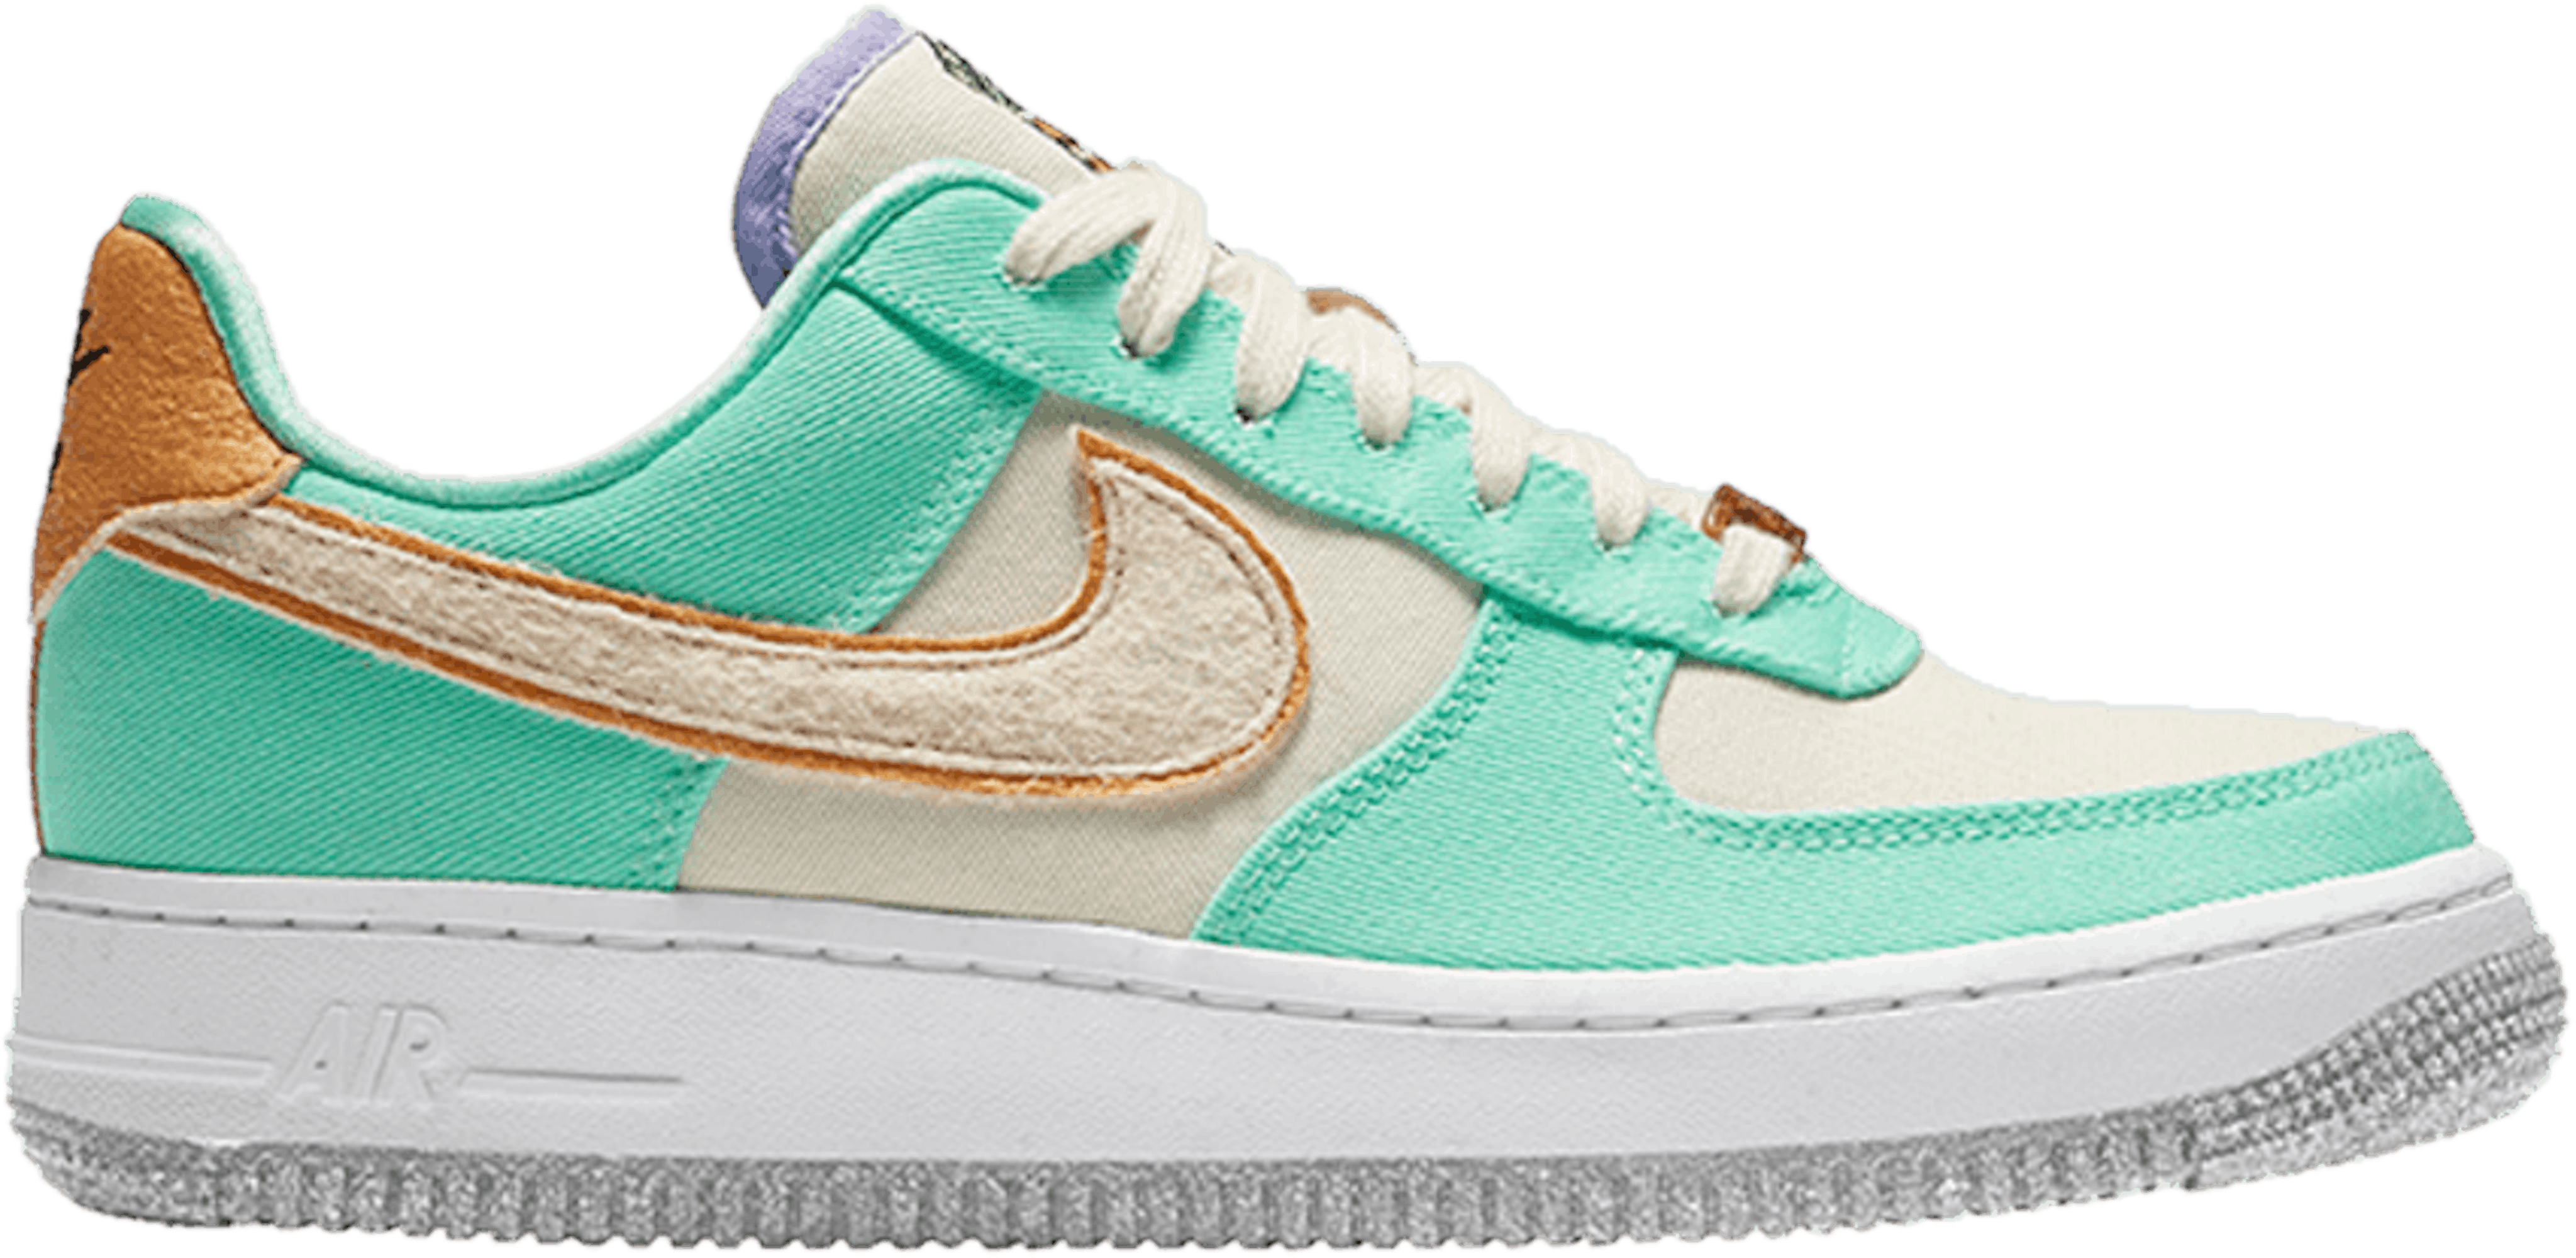 Nike Air Force 1 '07 LX WMNS "Happy Pineapple" |… | Sneaker Squad